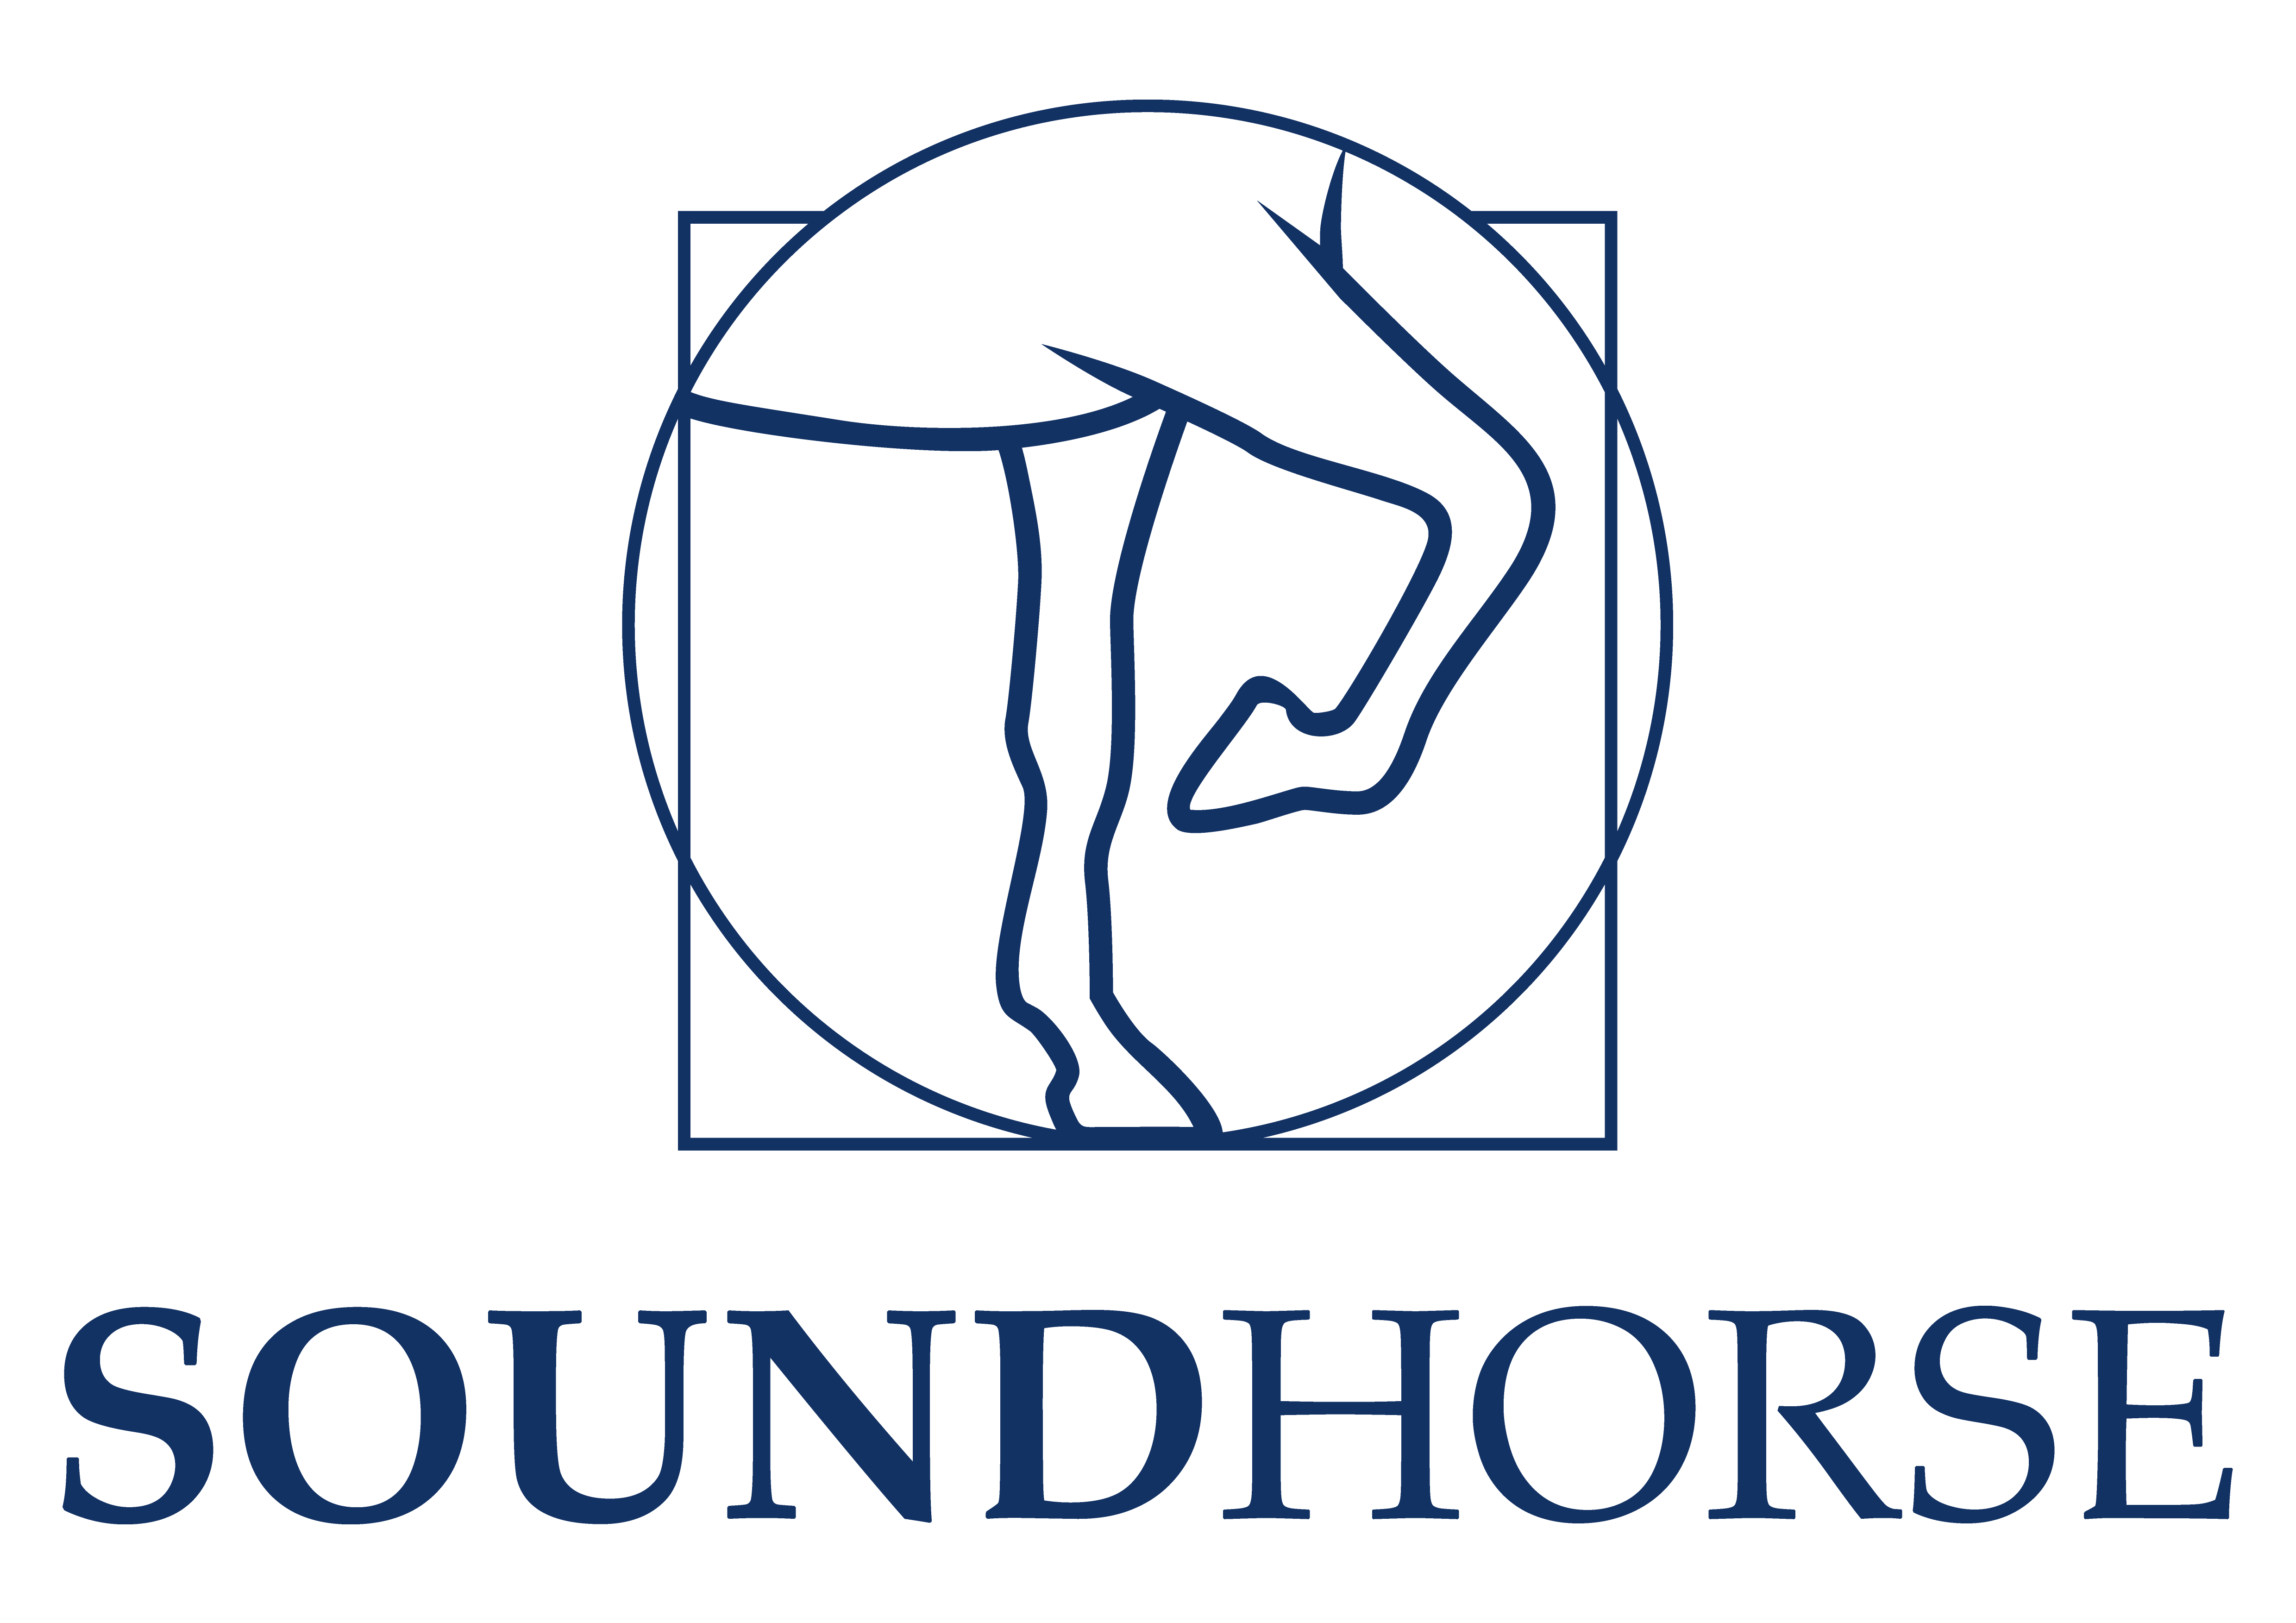 A blue logo of the word " poundhorse ".